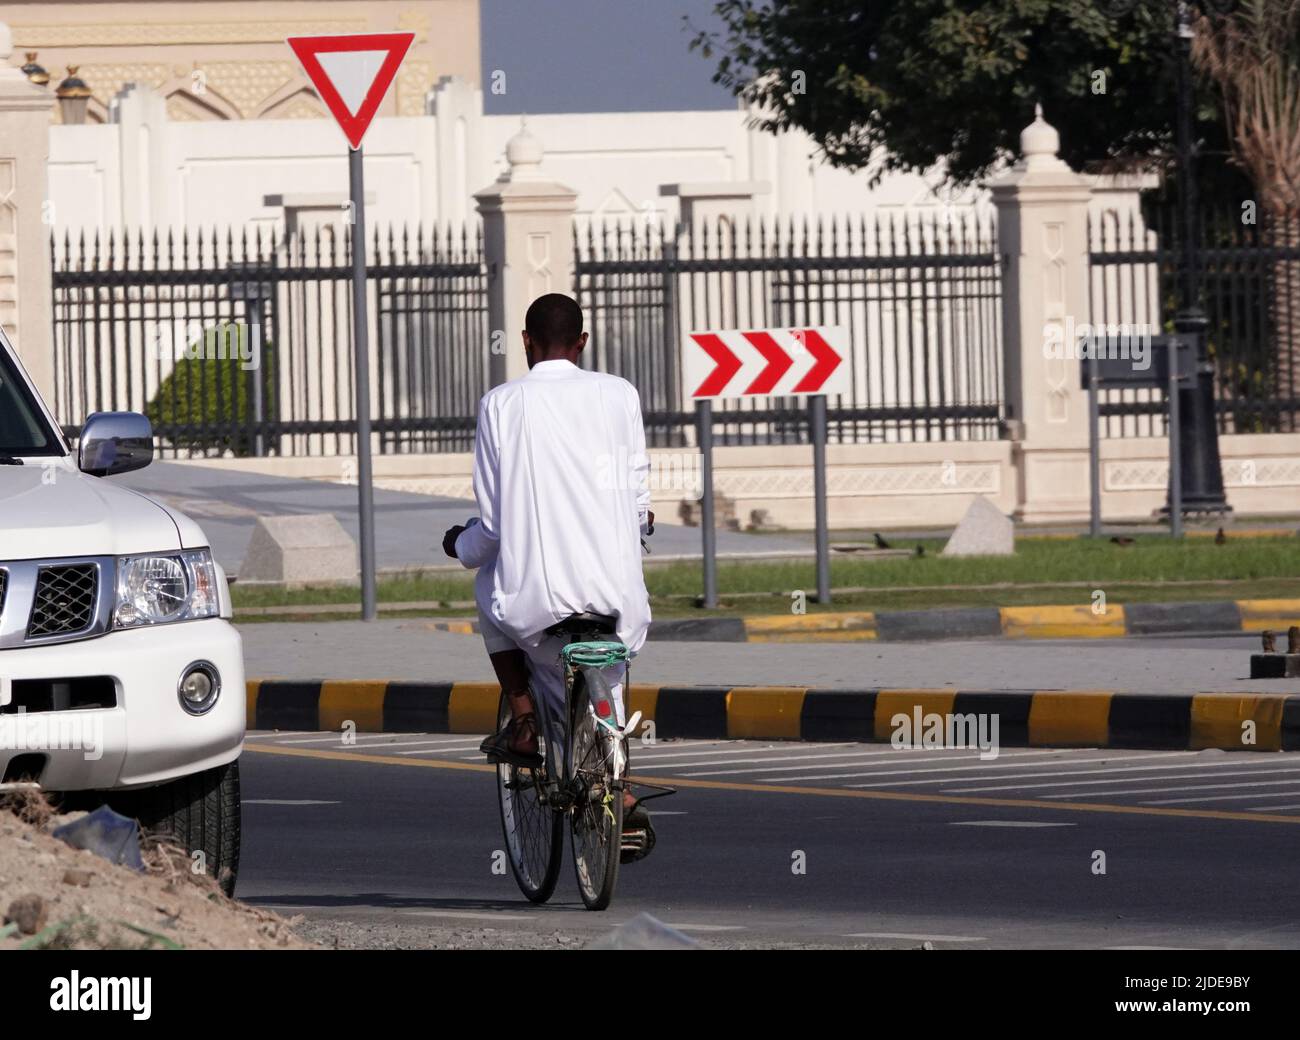 Sharjah, UAE February 21, 2020: A man in national dress rides a bicycle. Stock Photo